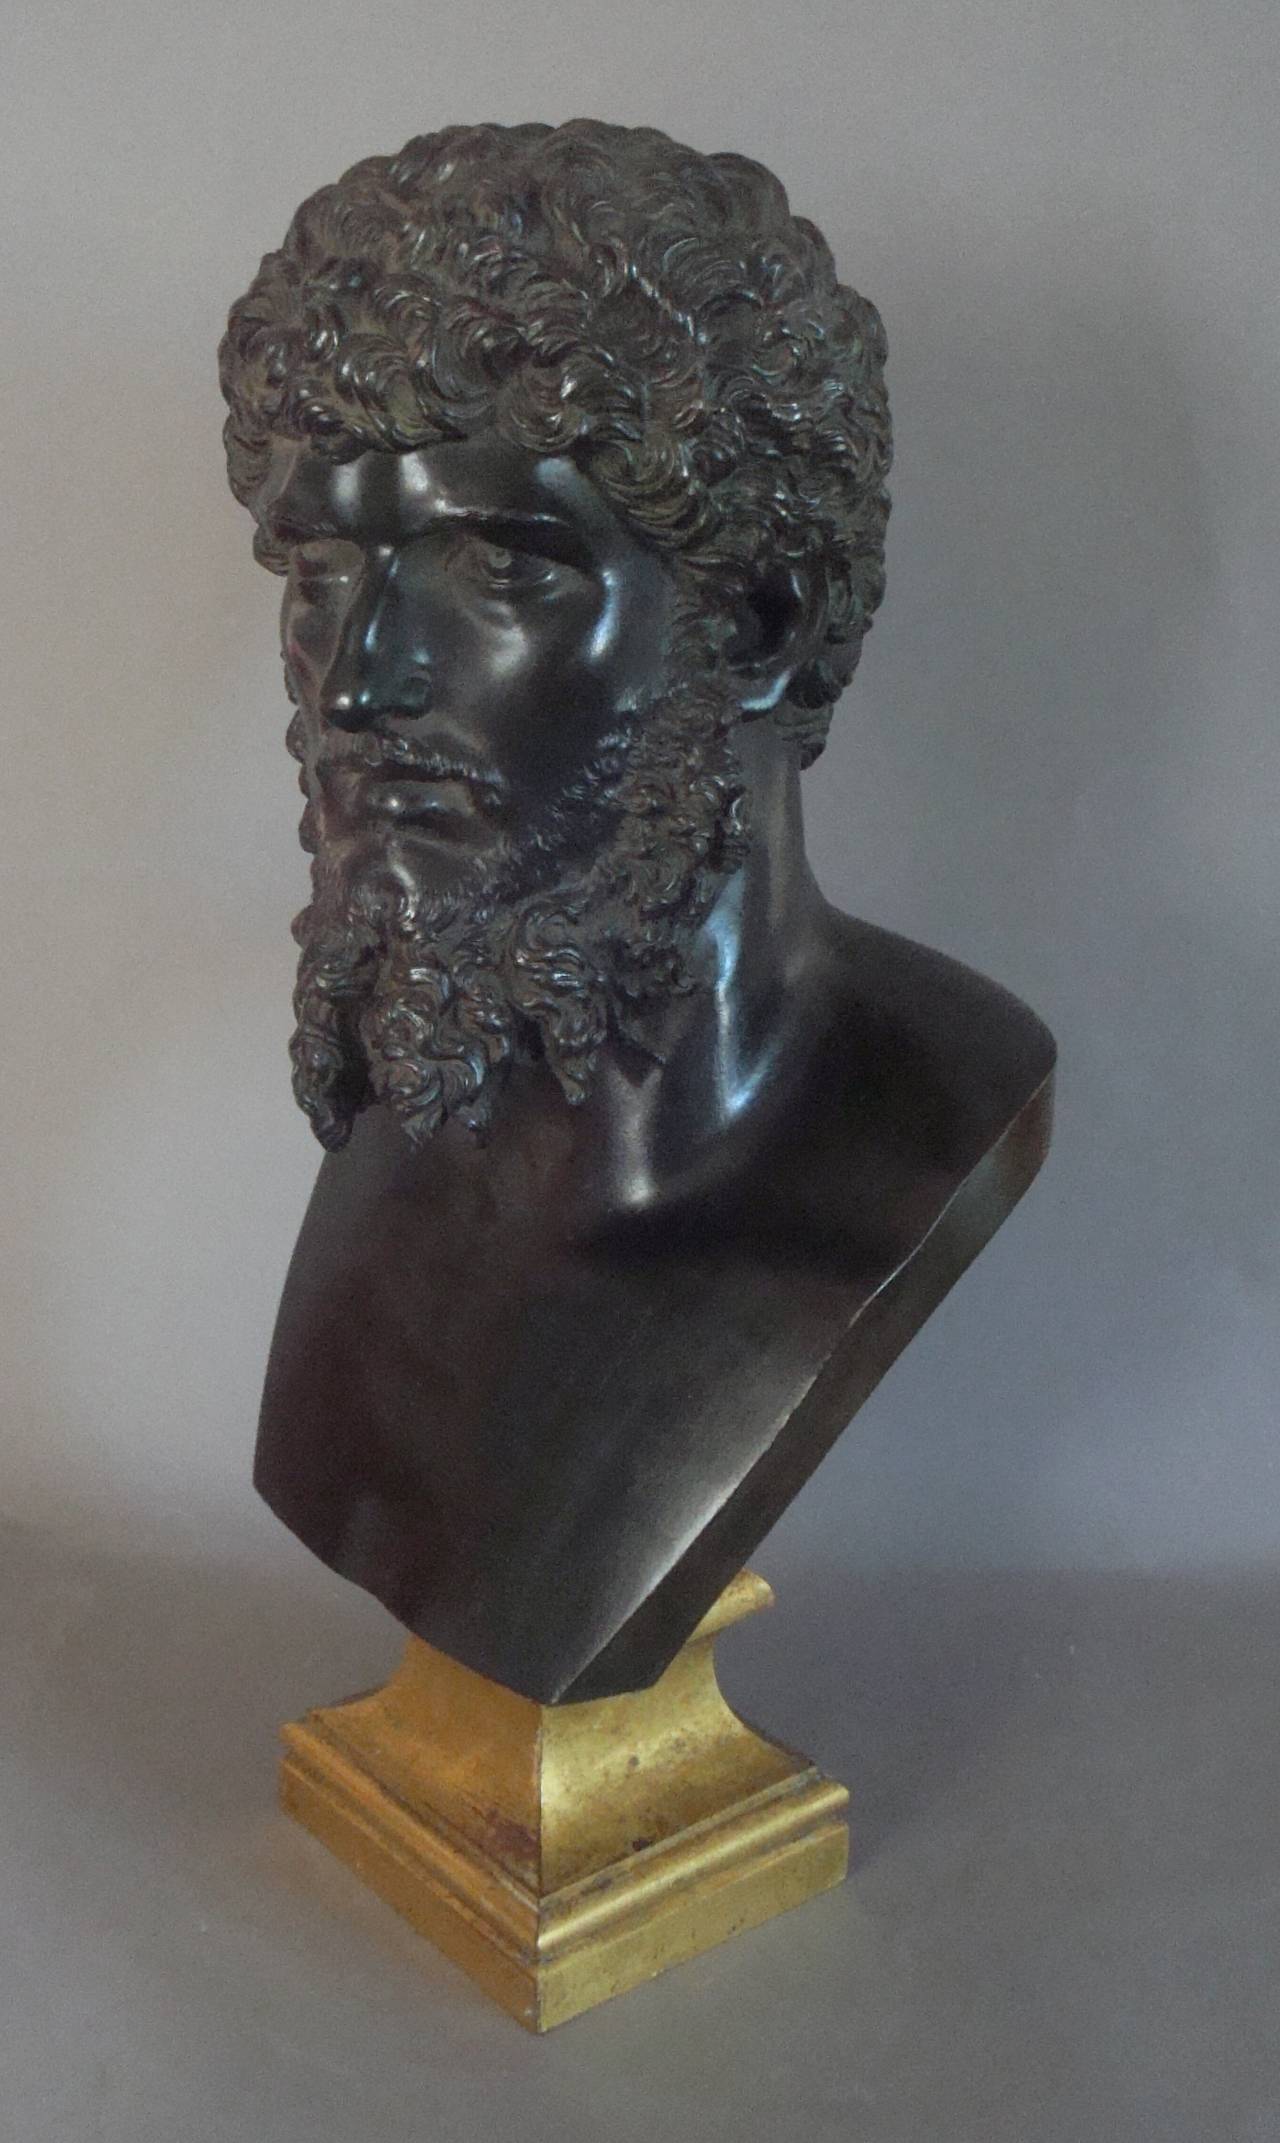 C19th Grand Tour bronze bust of Lucius Verus Emperor of Rome; who ruled 161-169 AD; this classical bronze is raised on original gilt bronze sockle.